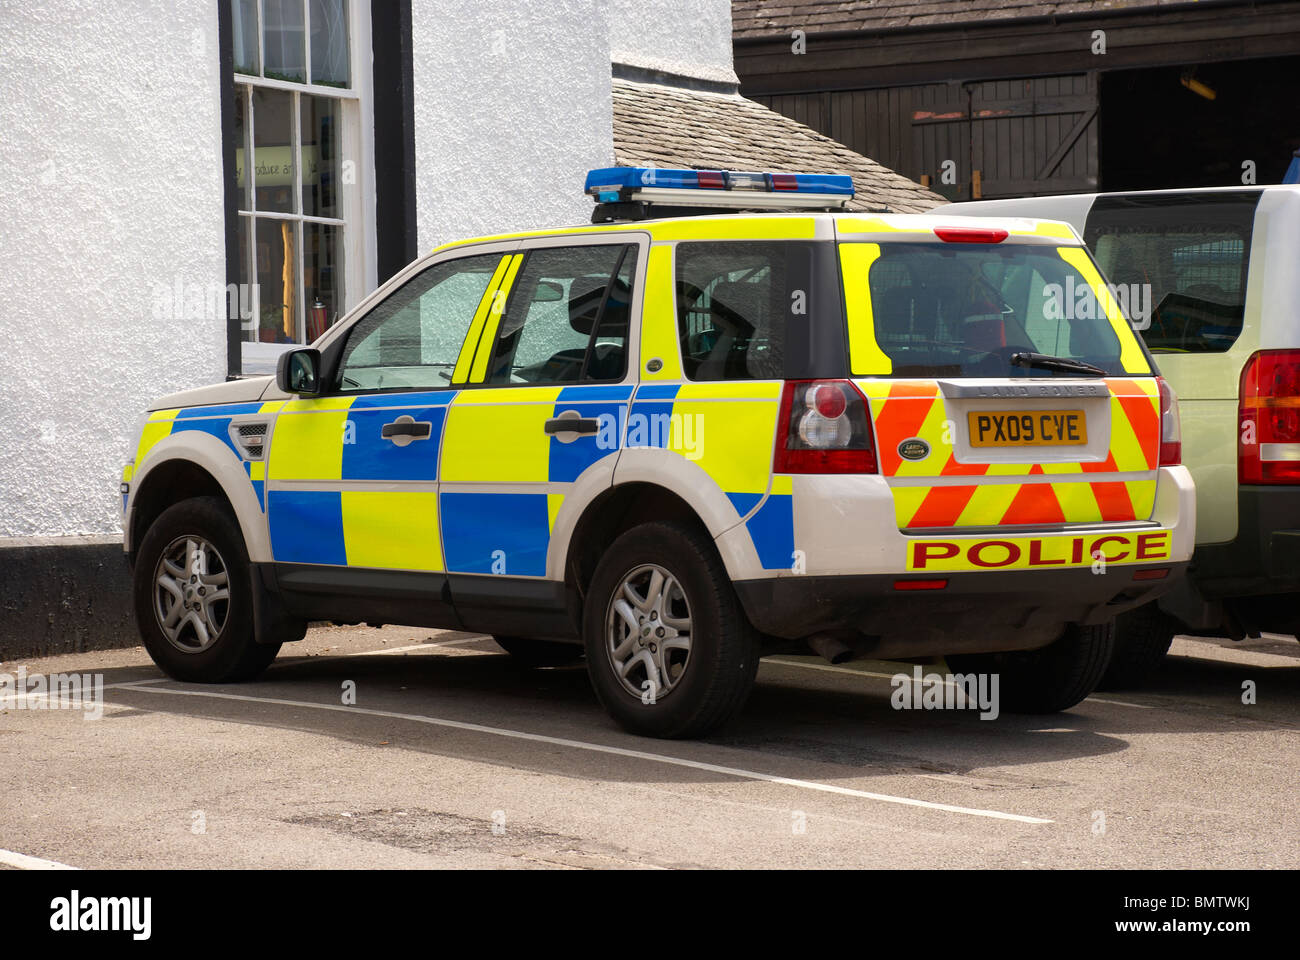 Police car parked in a hotel / pub car park in the lakes. Stock Photo